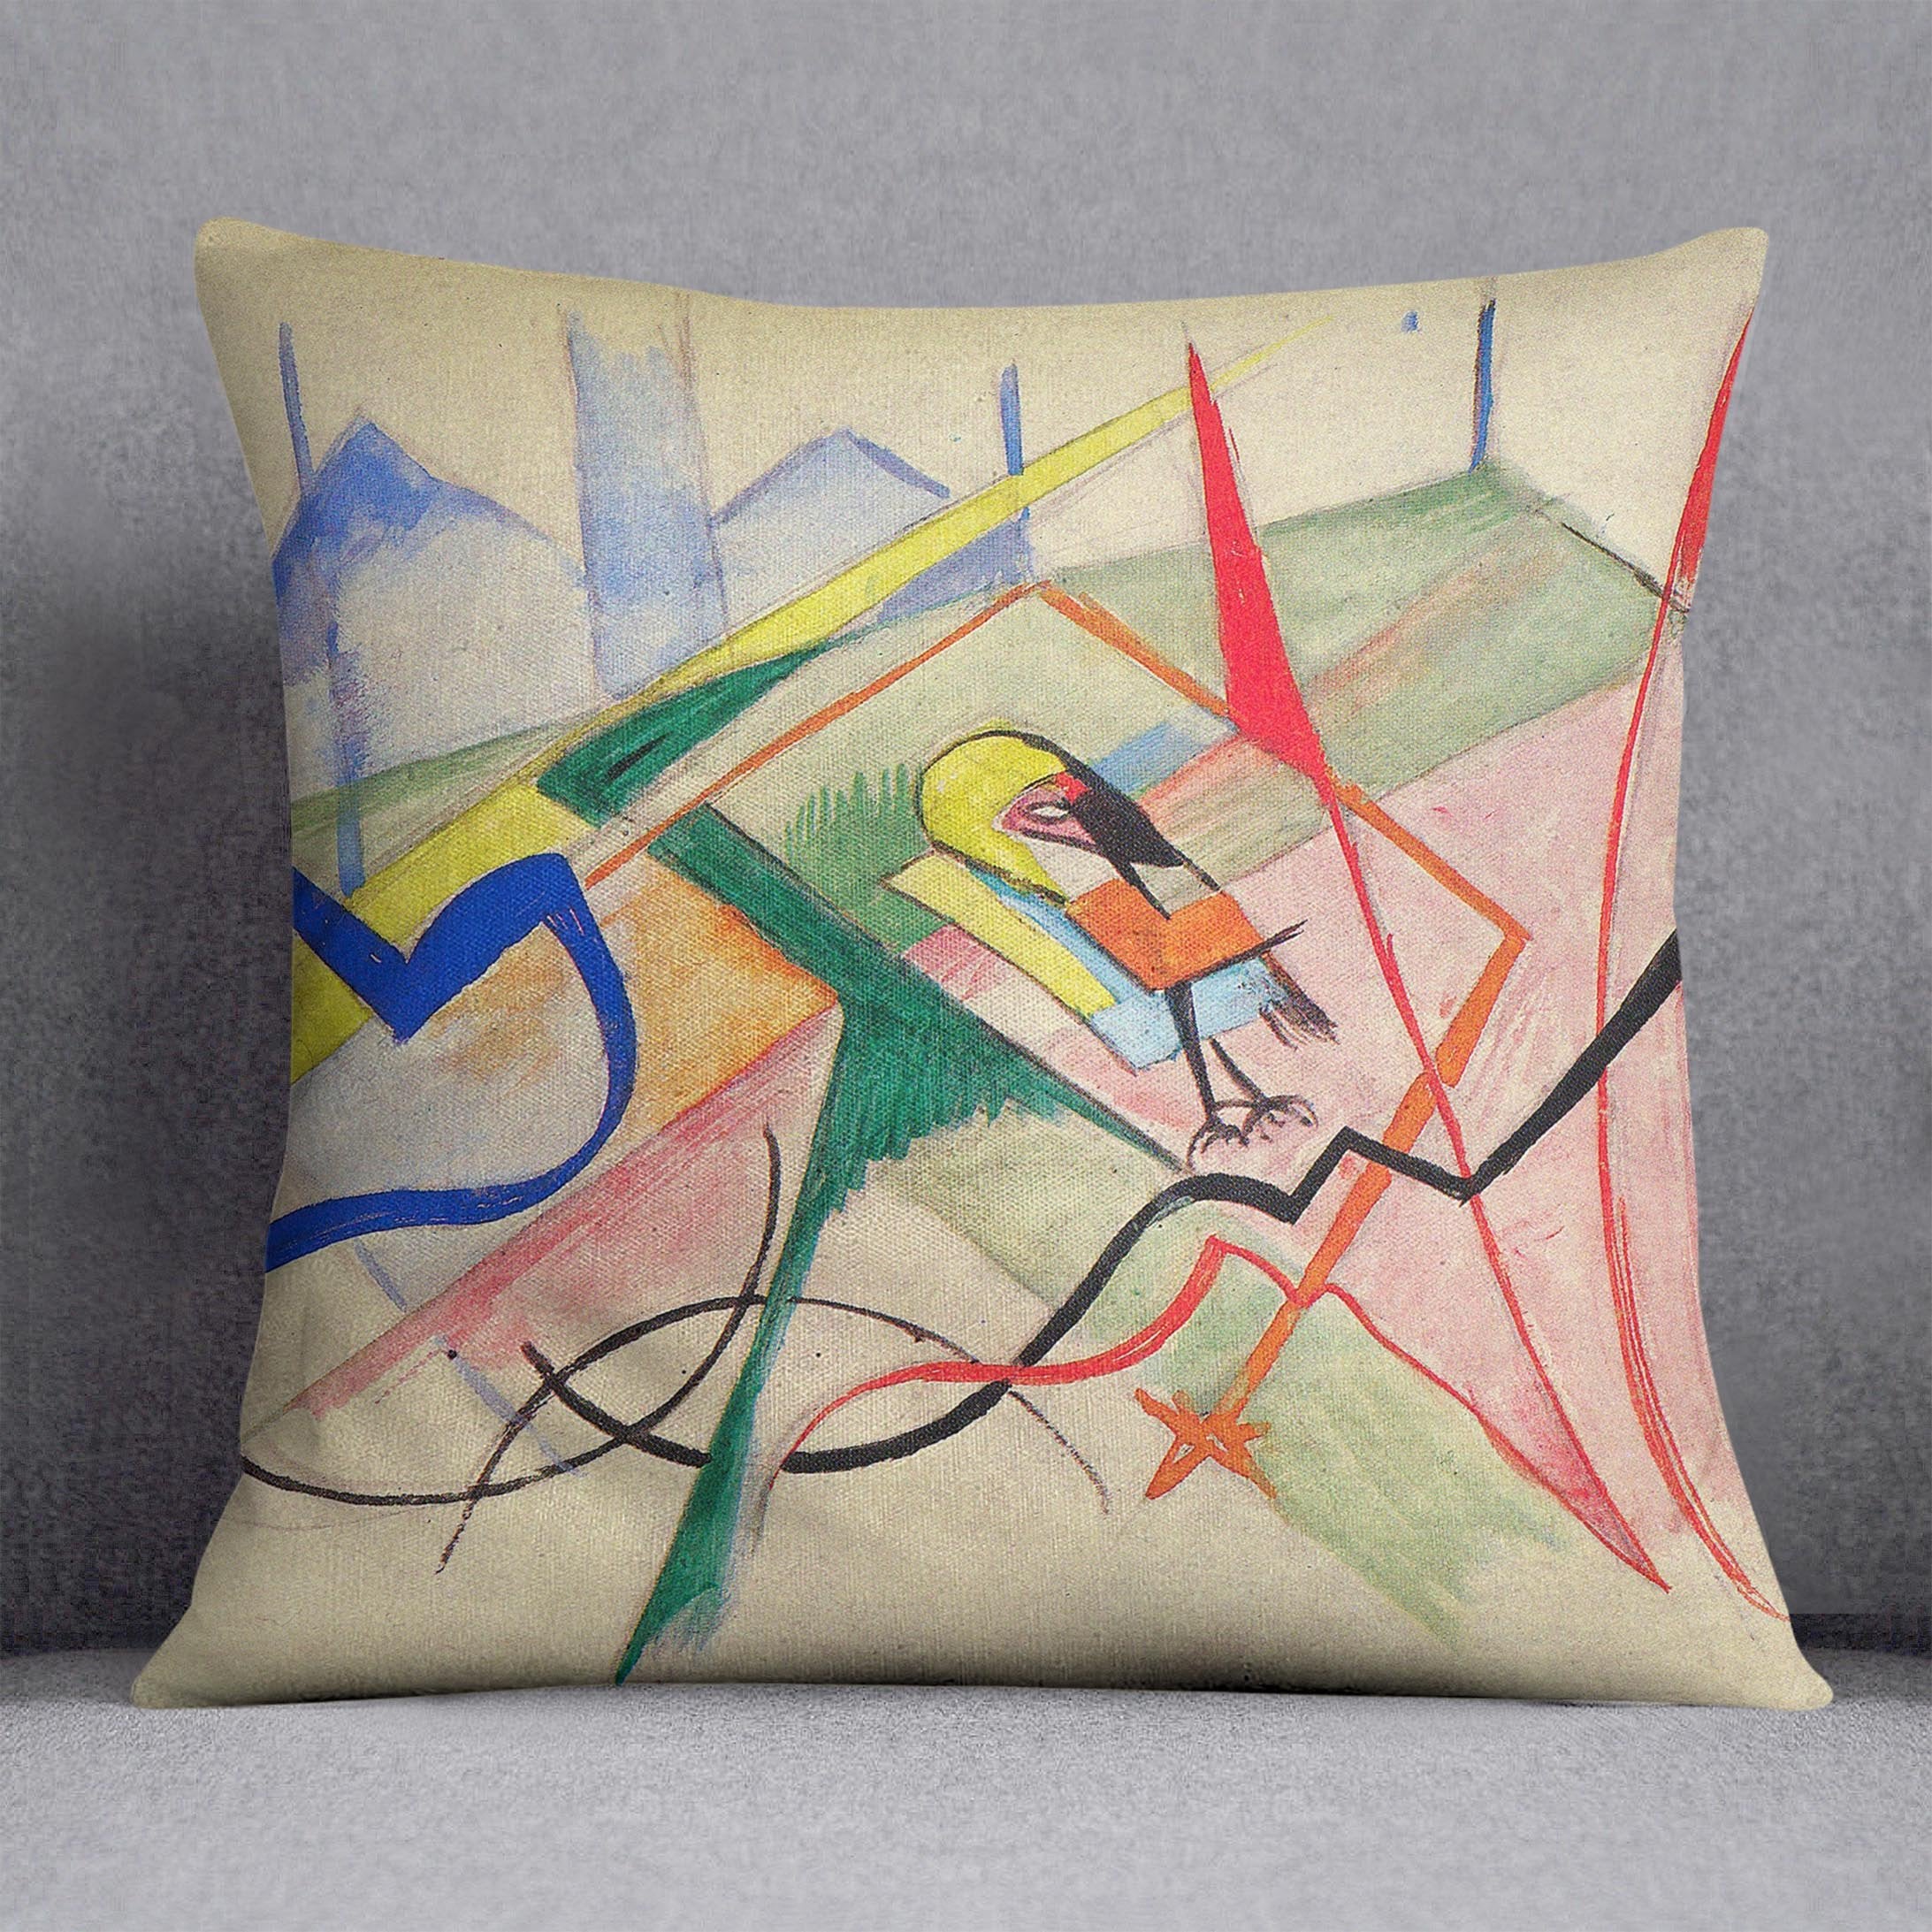 Small mythical creatures by Franz Marc Throw Pillow